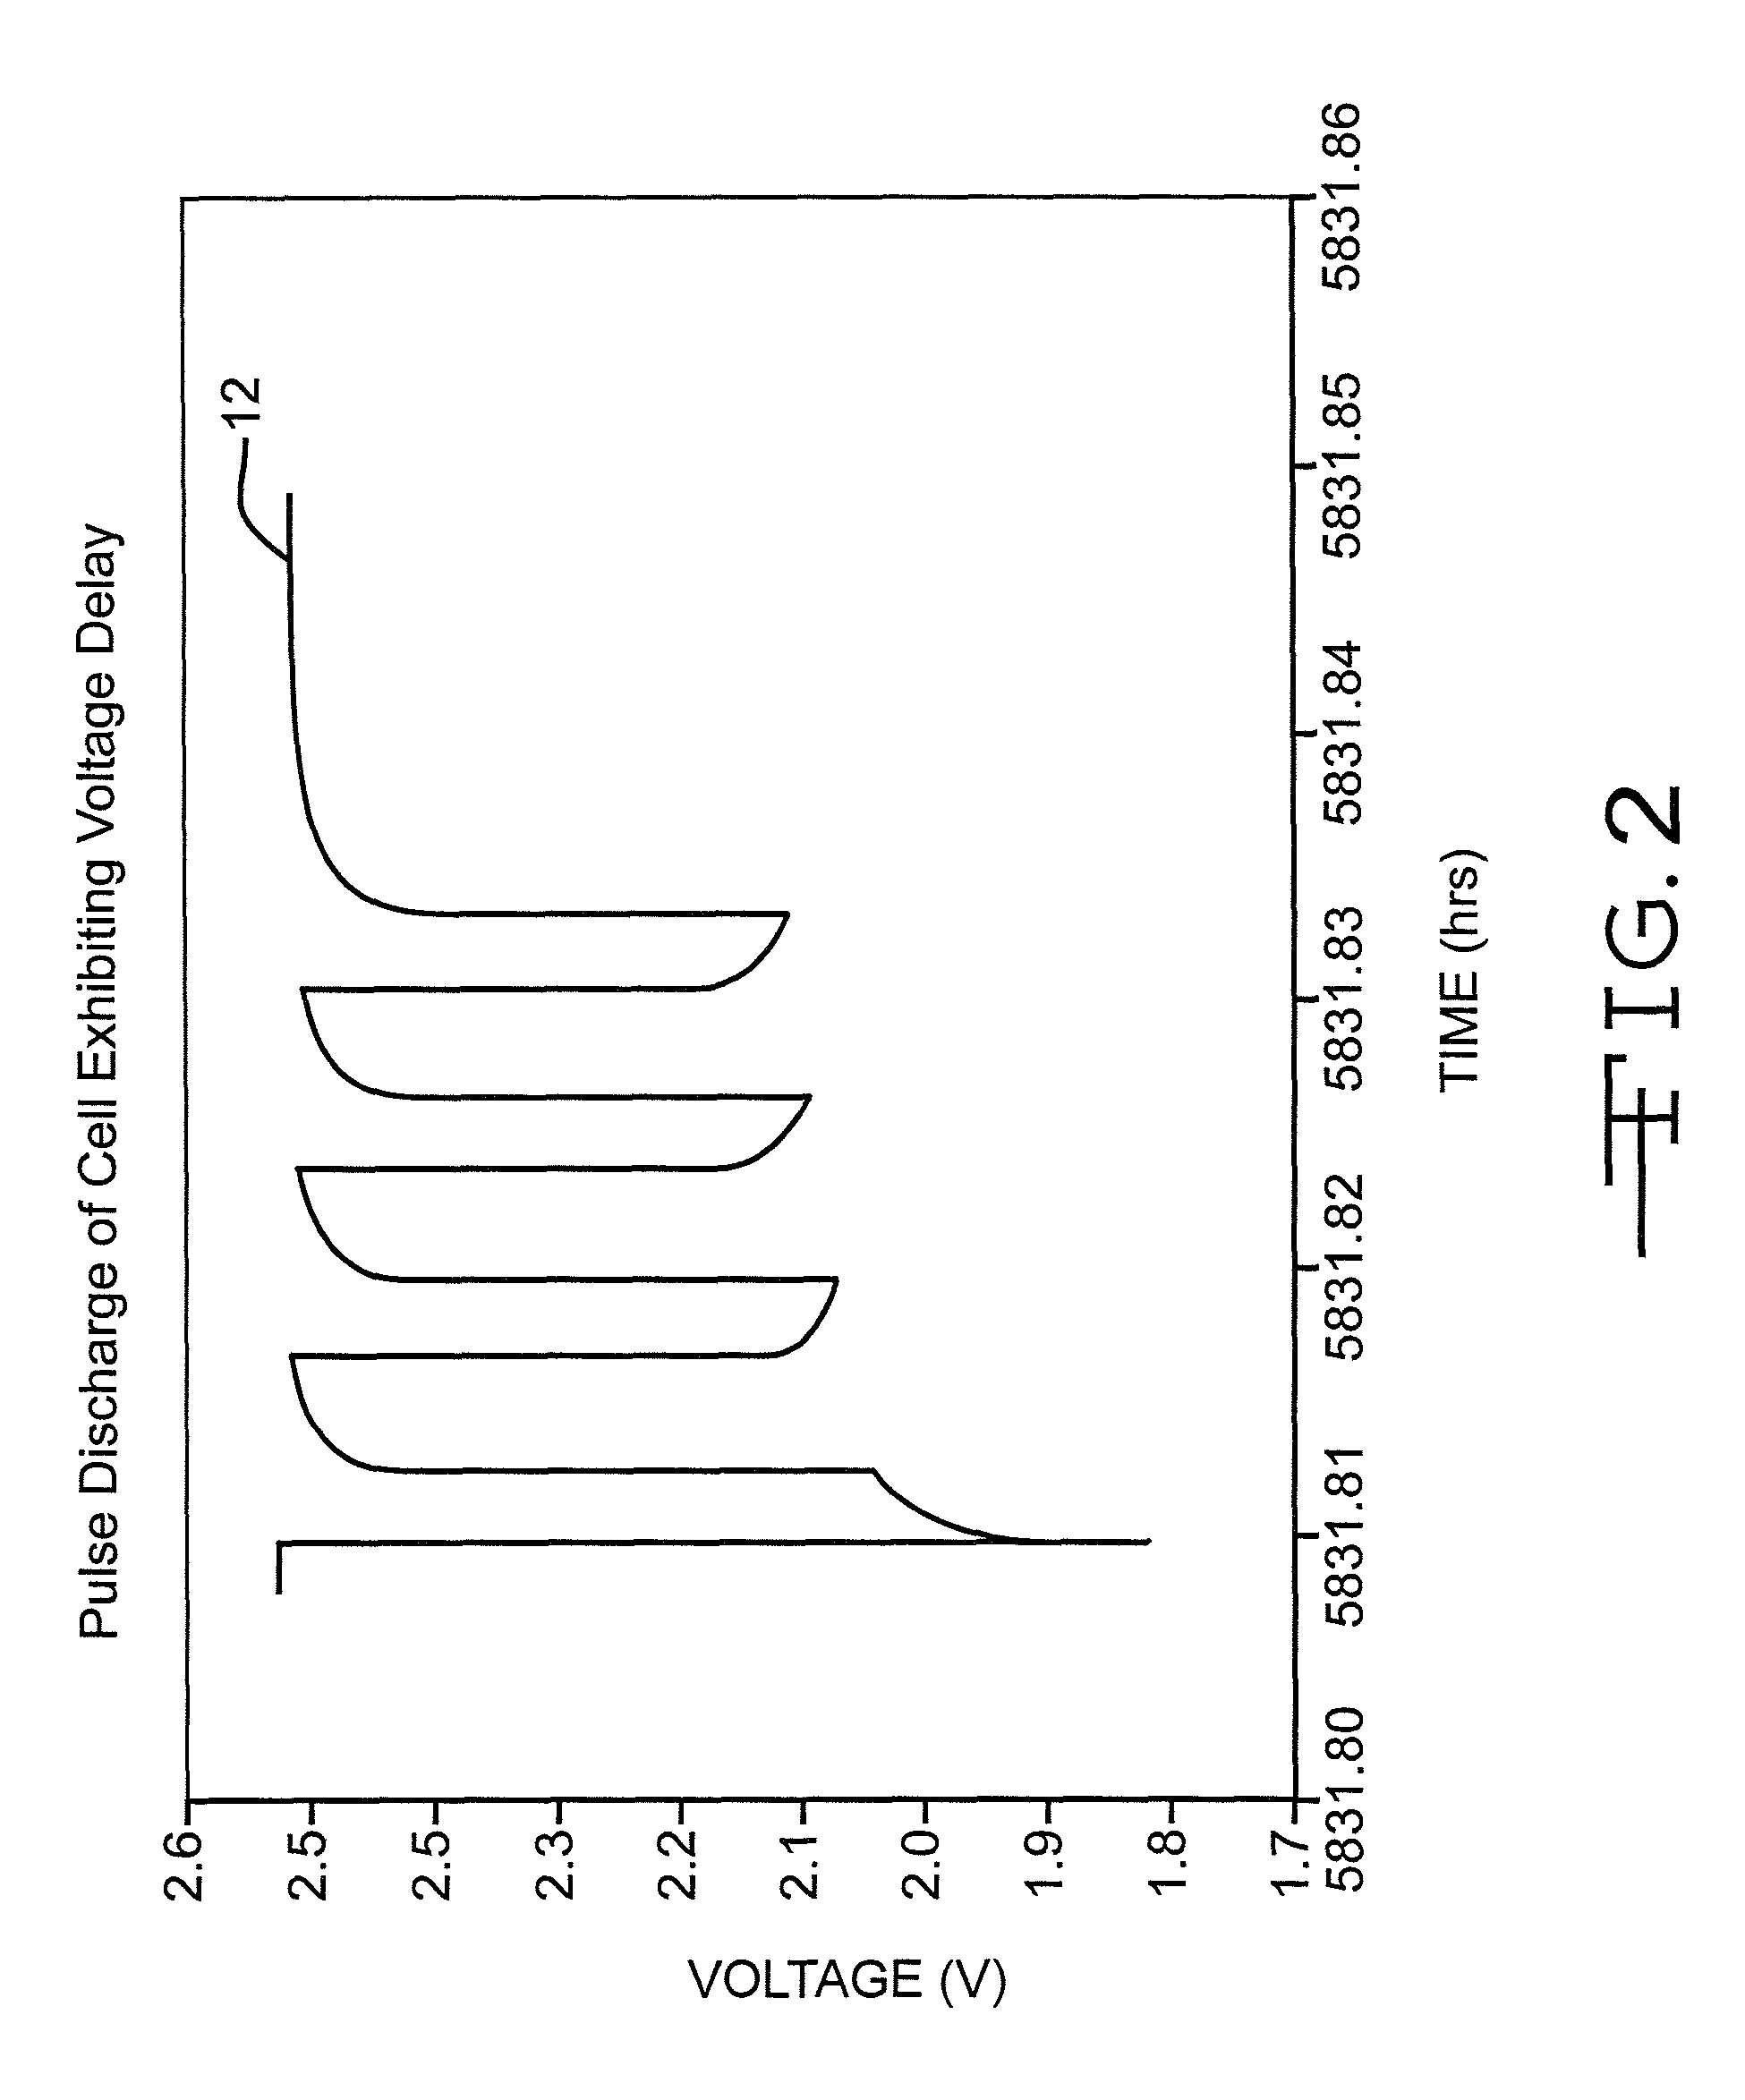 Method of controlling voltage delay and RDC growth in an electrochemical cell using low basis weight cathode material